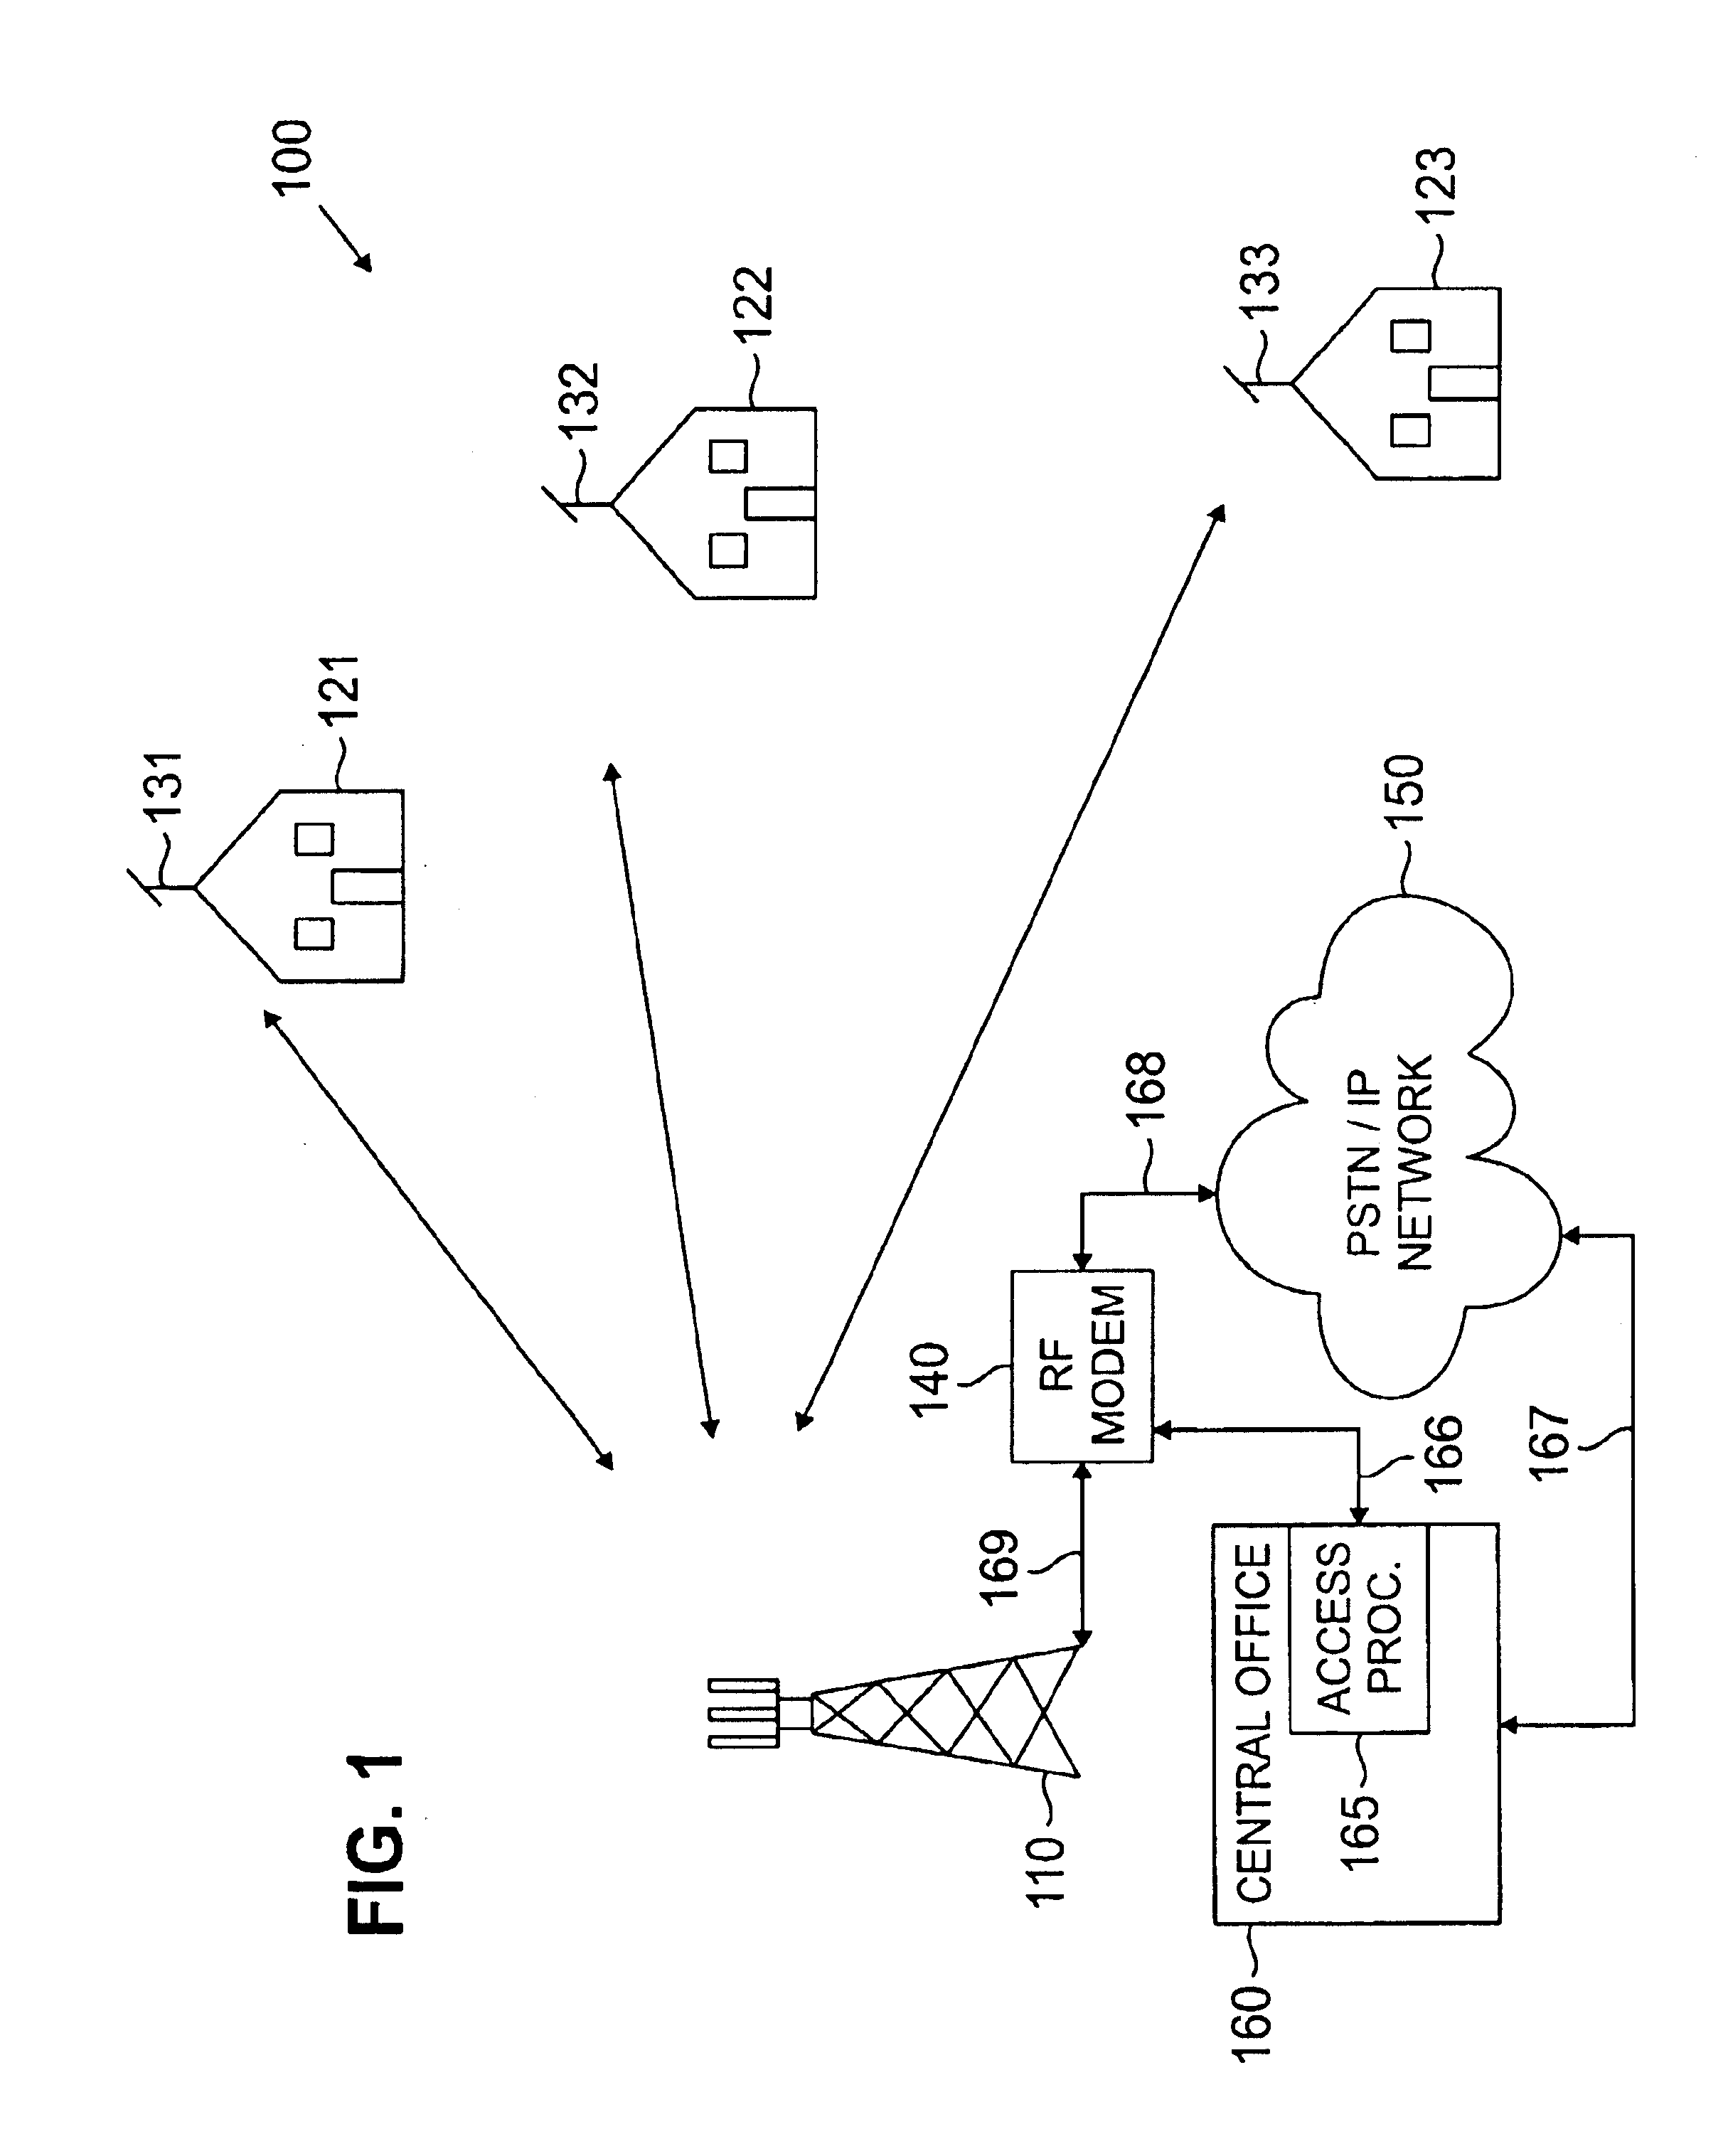 Wireless access system and associated method using multiple modulation formats in TDD frames according to subscriber service type